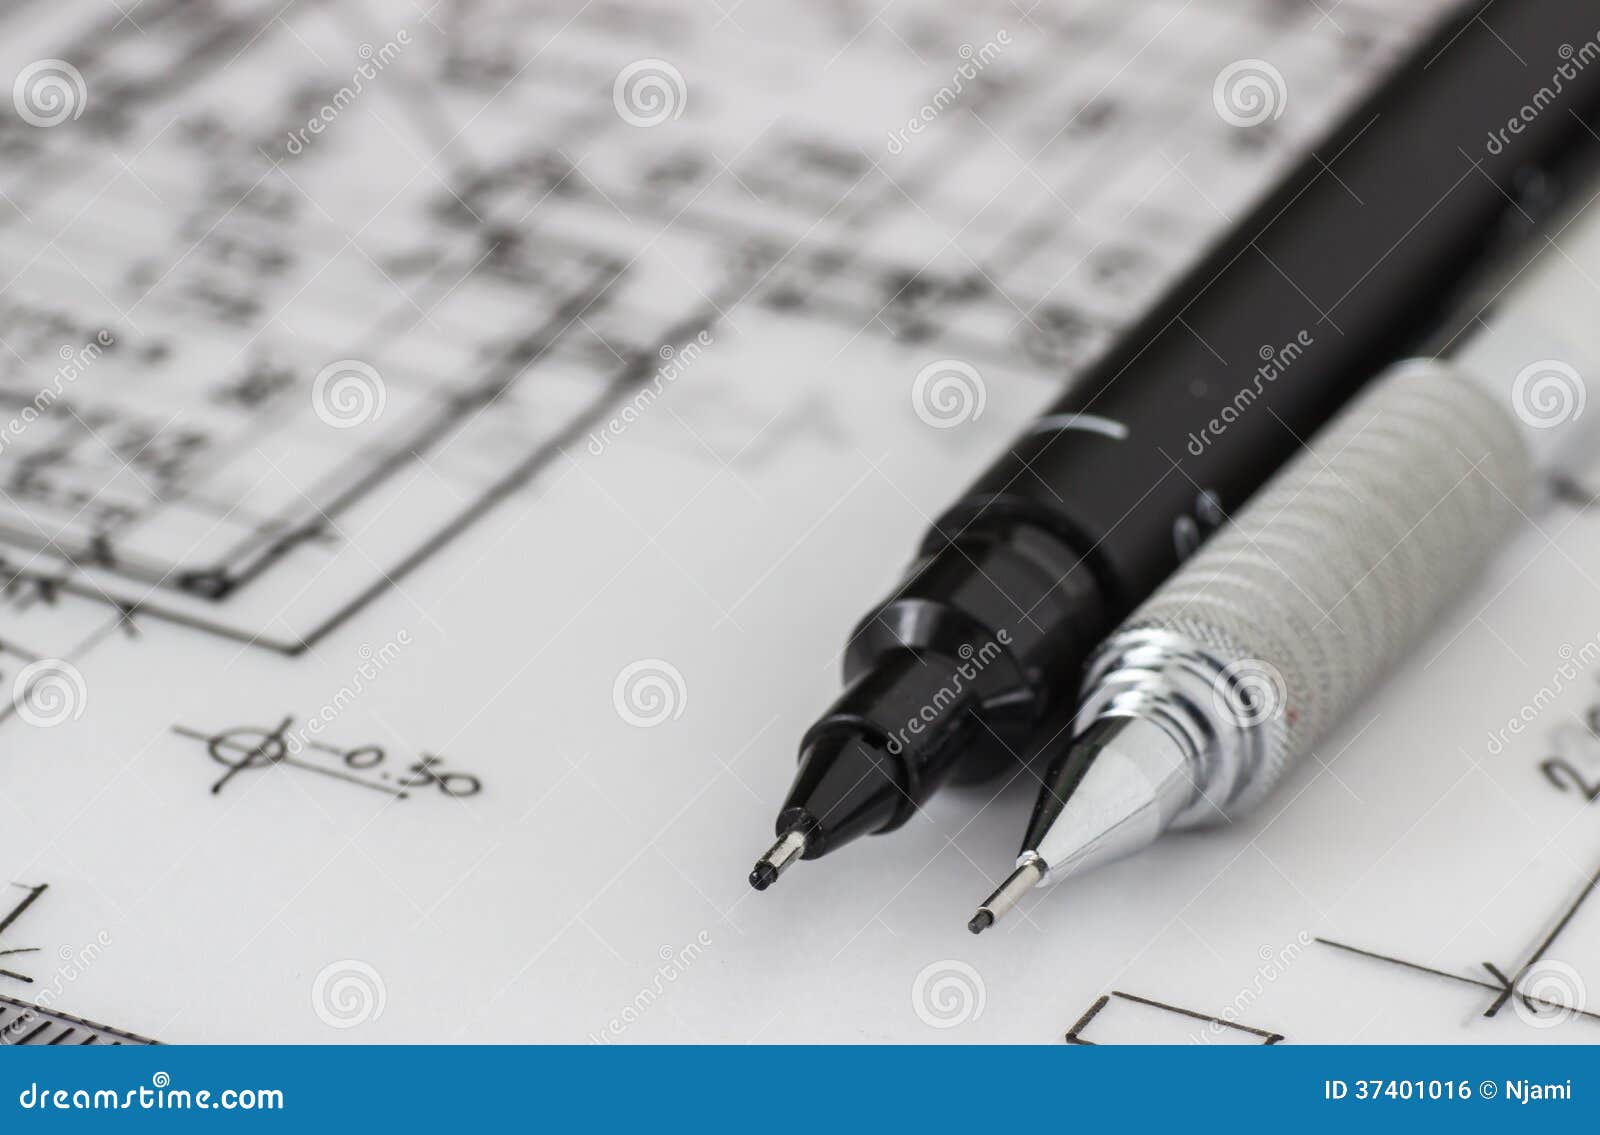 Technical And Mechanical Pen On Drawing Stock Photo - Image of close 